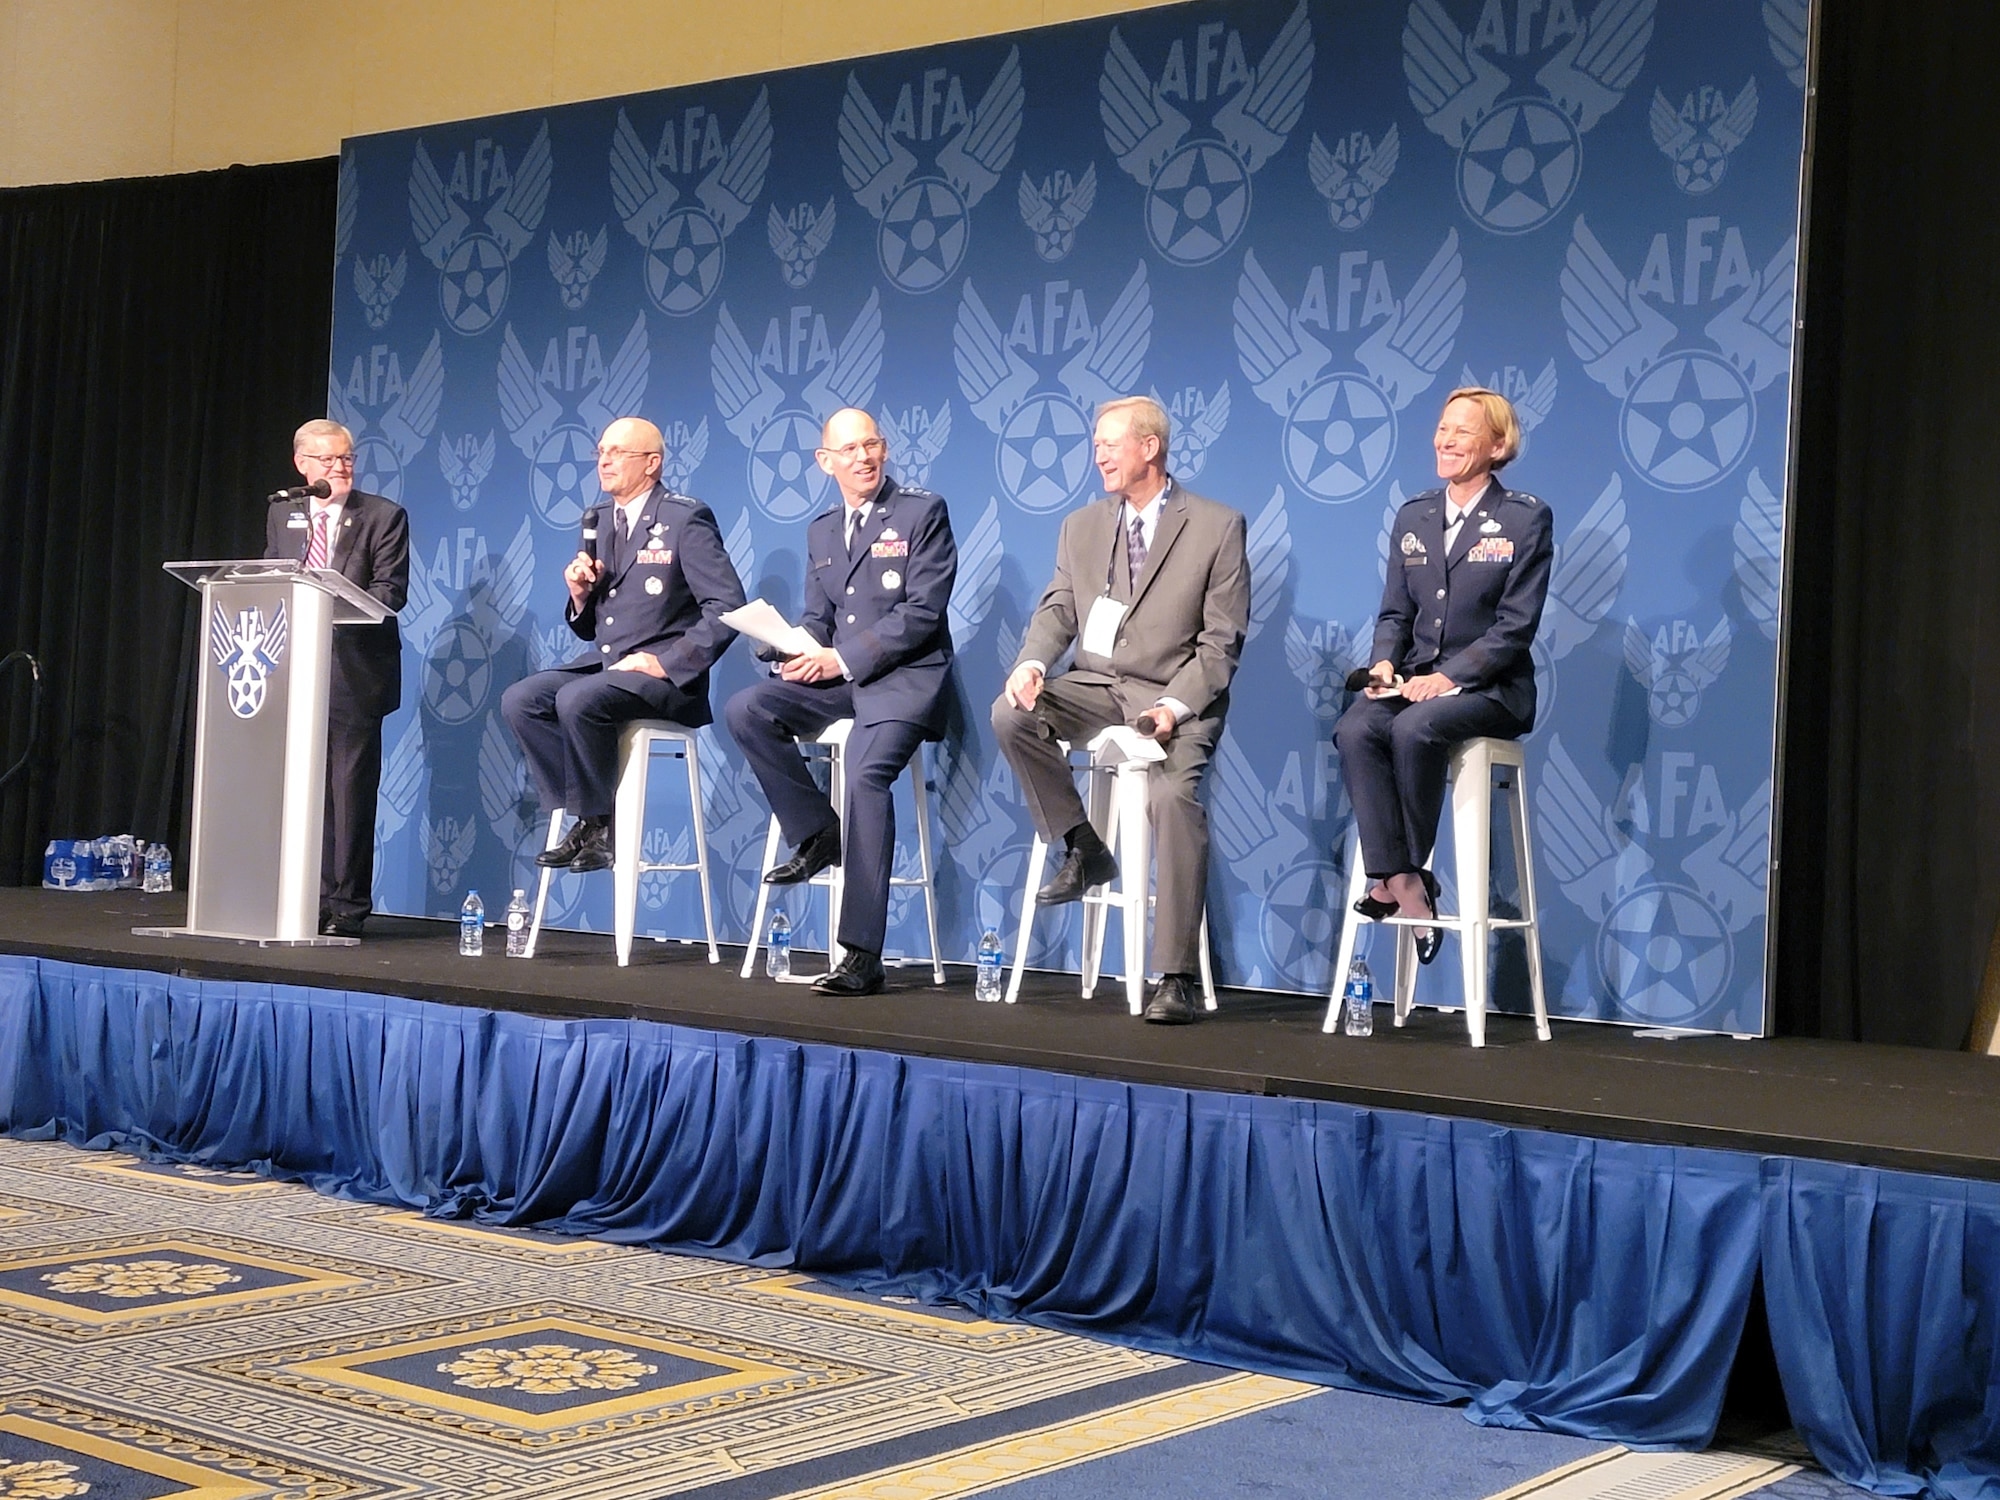 Air Force Research Laboratory Commander Maj. Gen. Heather Pringle (far right) participates in a panel discussion titled ‘From Acquisition to Lethality’ during the Air Force Association’s Air, Space & Cyber Conference in National Harbor, Maryland, Sept. 22, 2021, highlighting the role of science and technology in delivering capabilities to warfighters. Pictured left to right:  AFA President and retired Lt. Gen. Bruce “Orville” Wright; Gen. Arnold Bunch Jr., commander of Air Force Materiel Command; Lt. Gen. Duke Richardson, military deputy for the Office of the Assistant Secretary of the Air Force for Acquisition, Technology and Logistics; and Randy Walden, director and program executive officer for the Air Force Rapid Capabilities Office. (U.S. Air Force photo/Steven Doub)